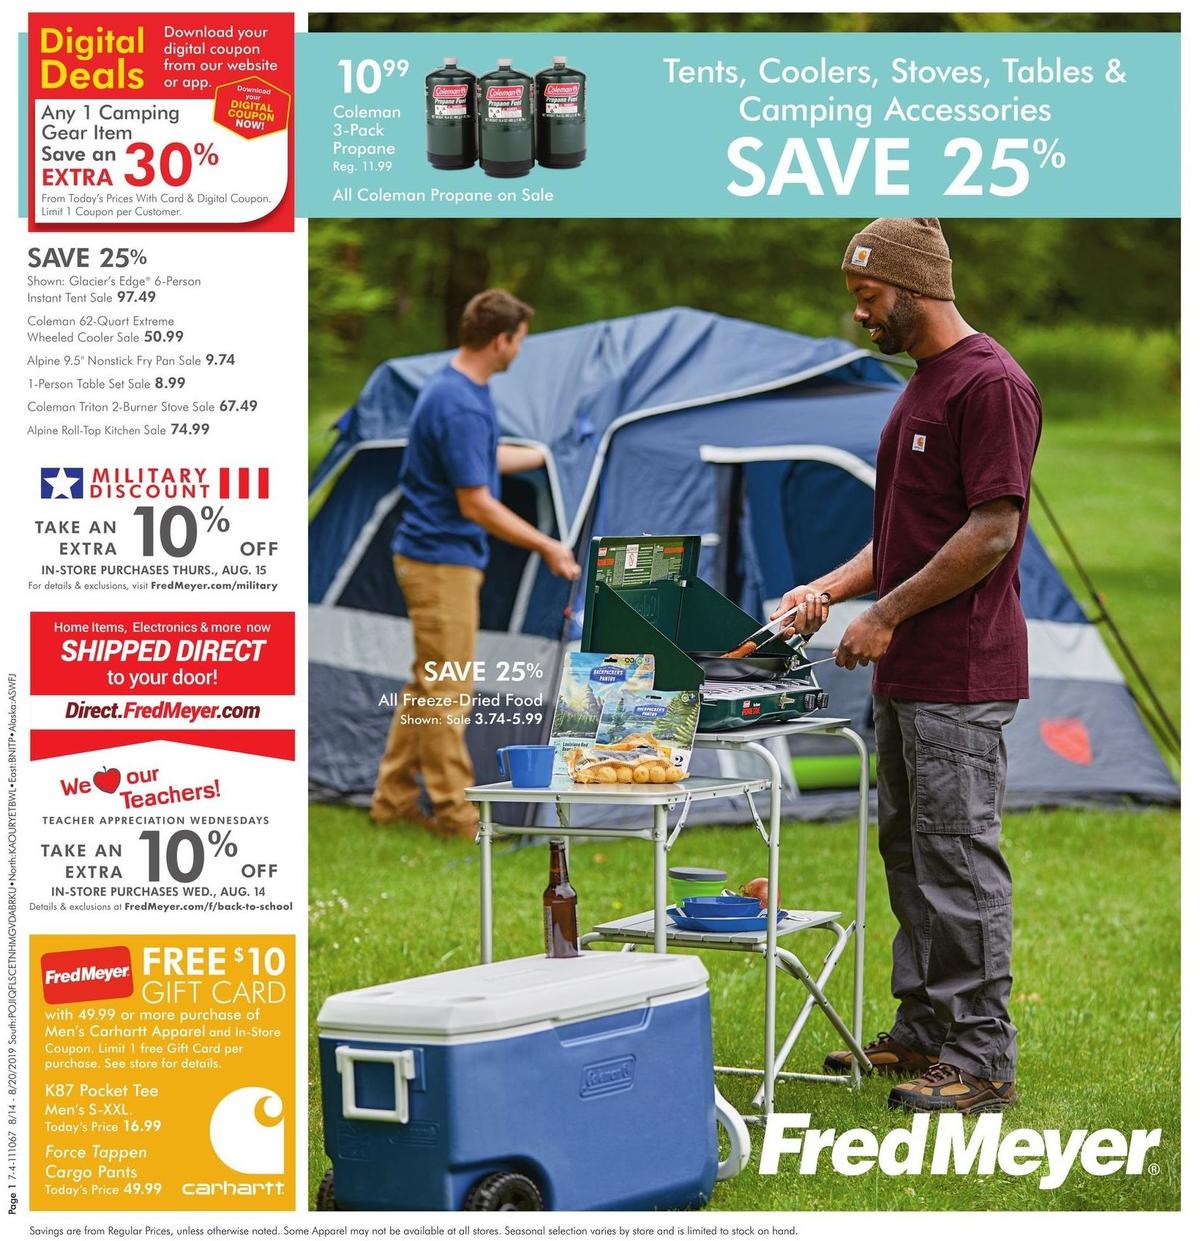 Fred Meyer General Merchandise Weekly Ad from August 14